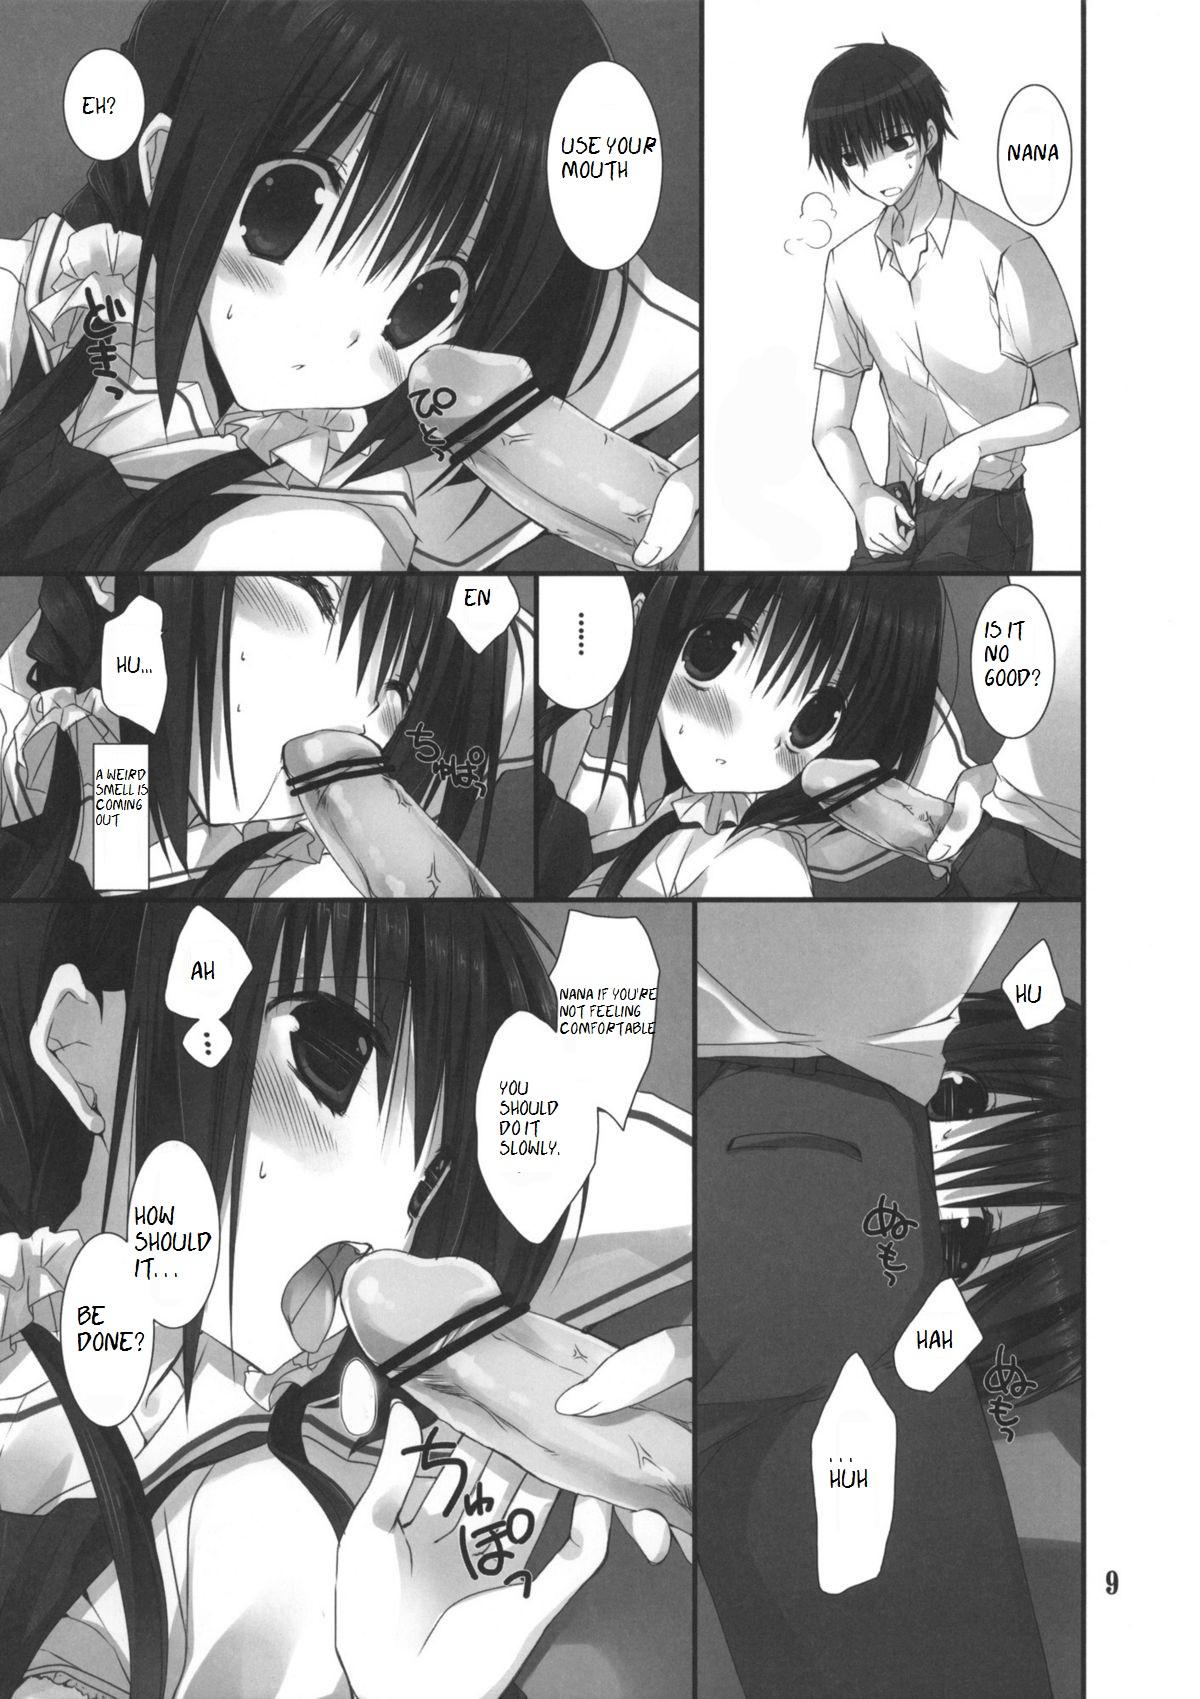 Smooth Imouto no Otetsudai 3 | Little Sister Helper 3 Female - Page 8